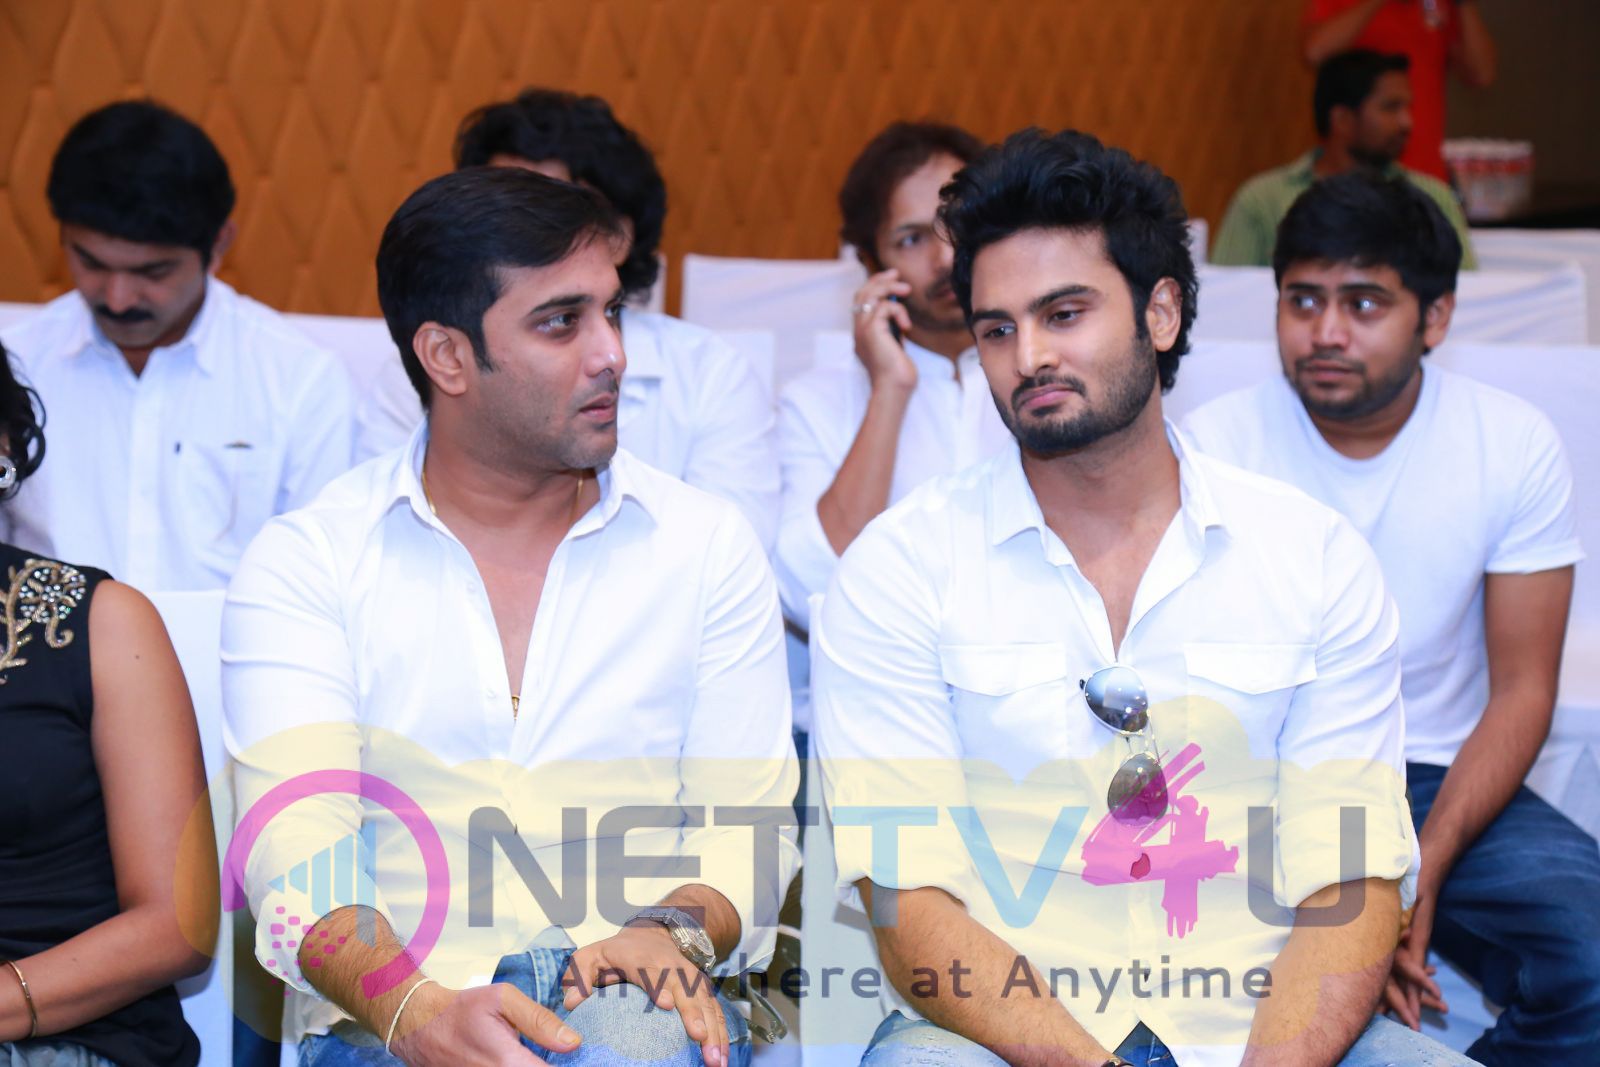 Tollywood Thunders Franchise Launch Attractive Photos Telugu Gallery